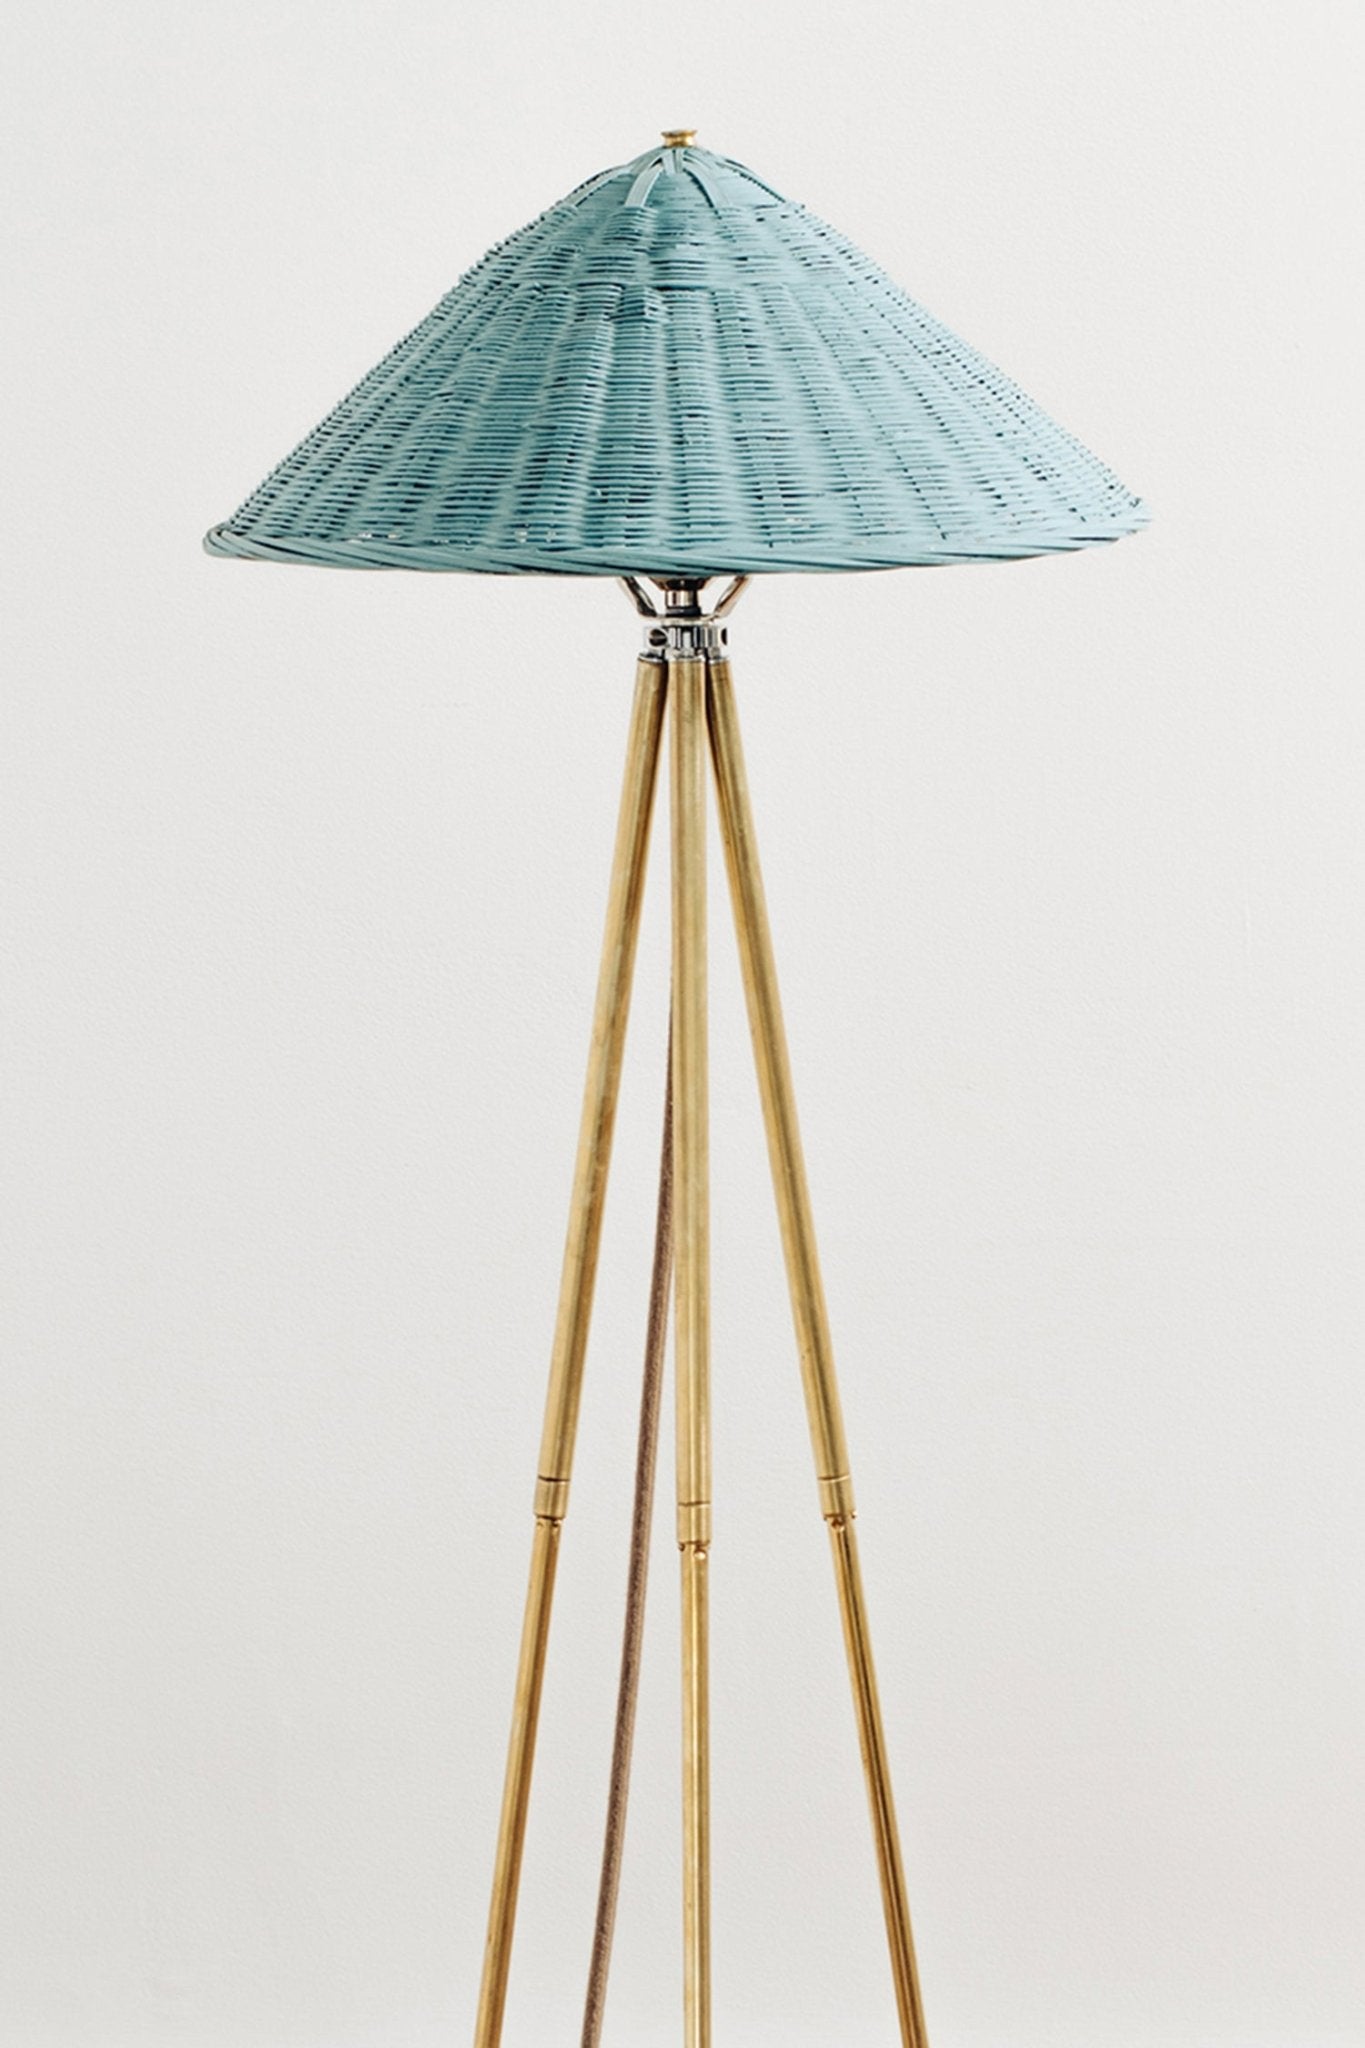 'Horst' Tripod Lamp in Brass with Hand-Painted Woven Rattan 'Cocteau' Shade — Model No. 010 - Tennant New York